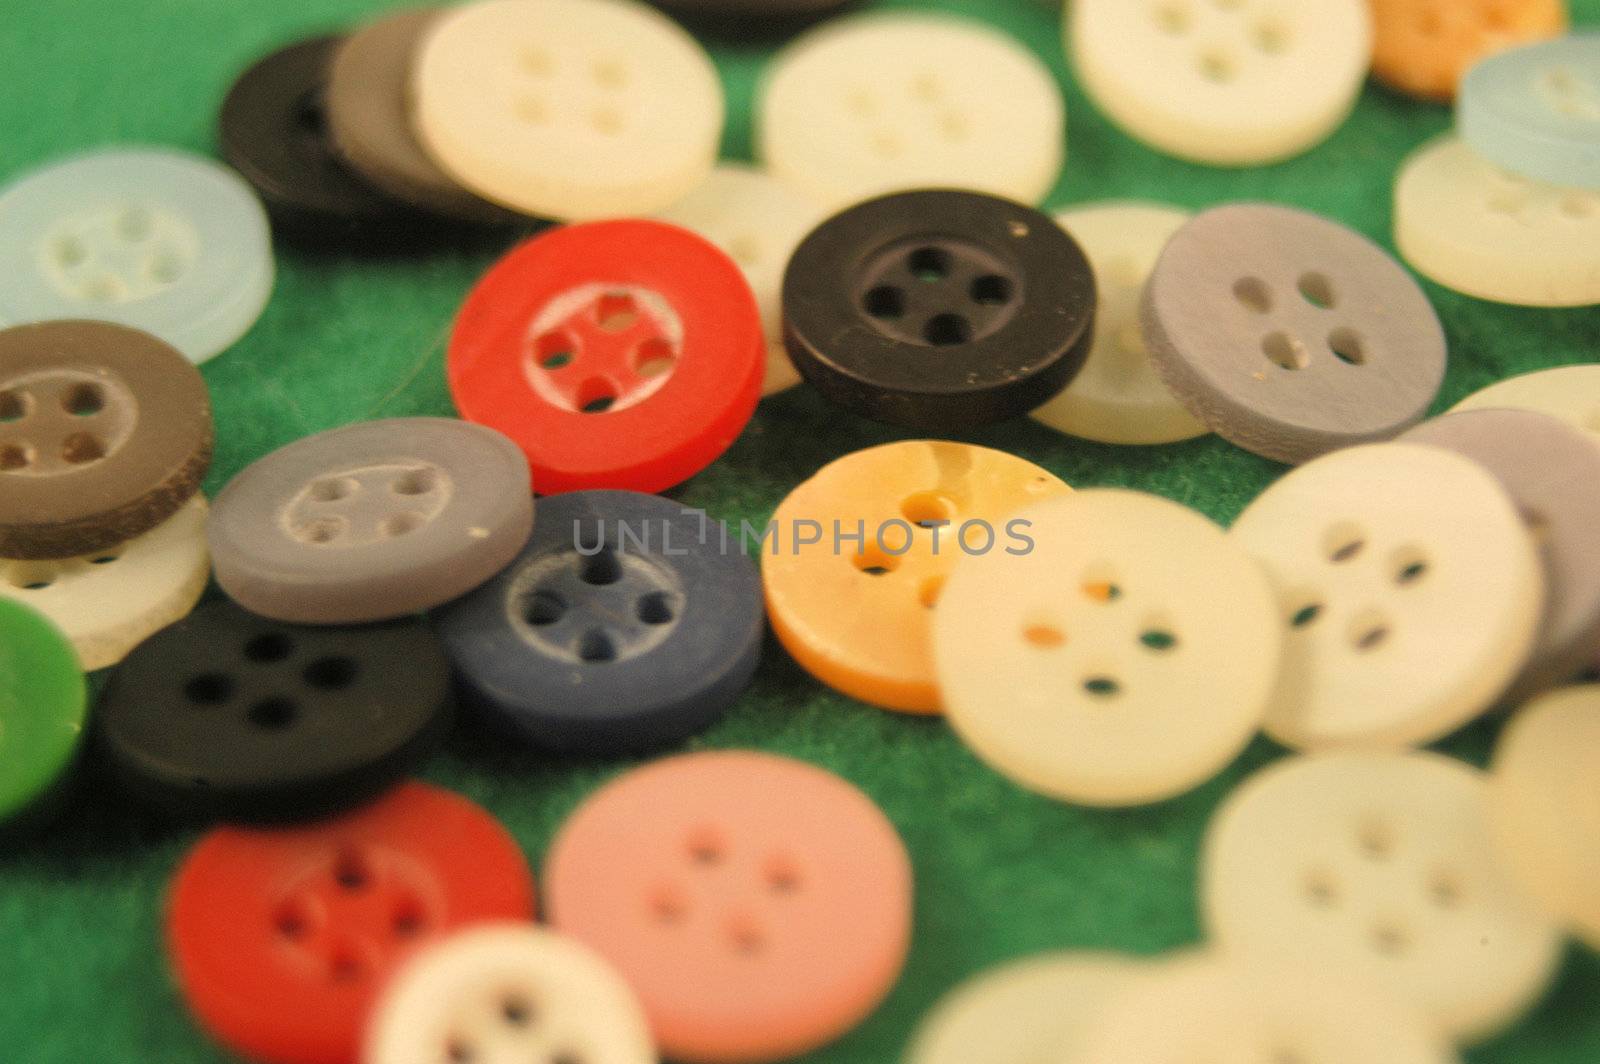 A large pile of buttons on a field green